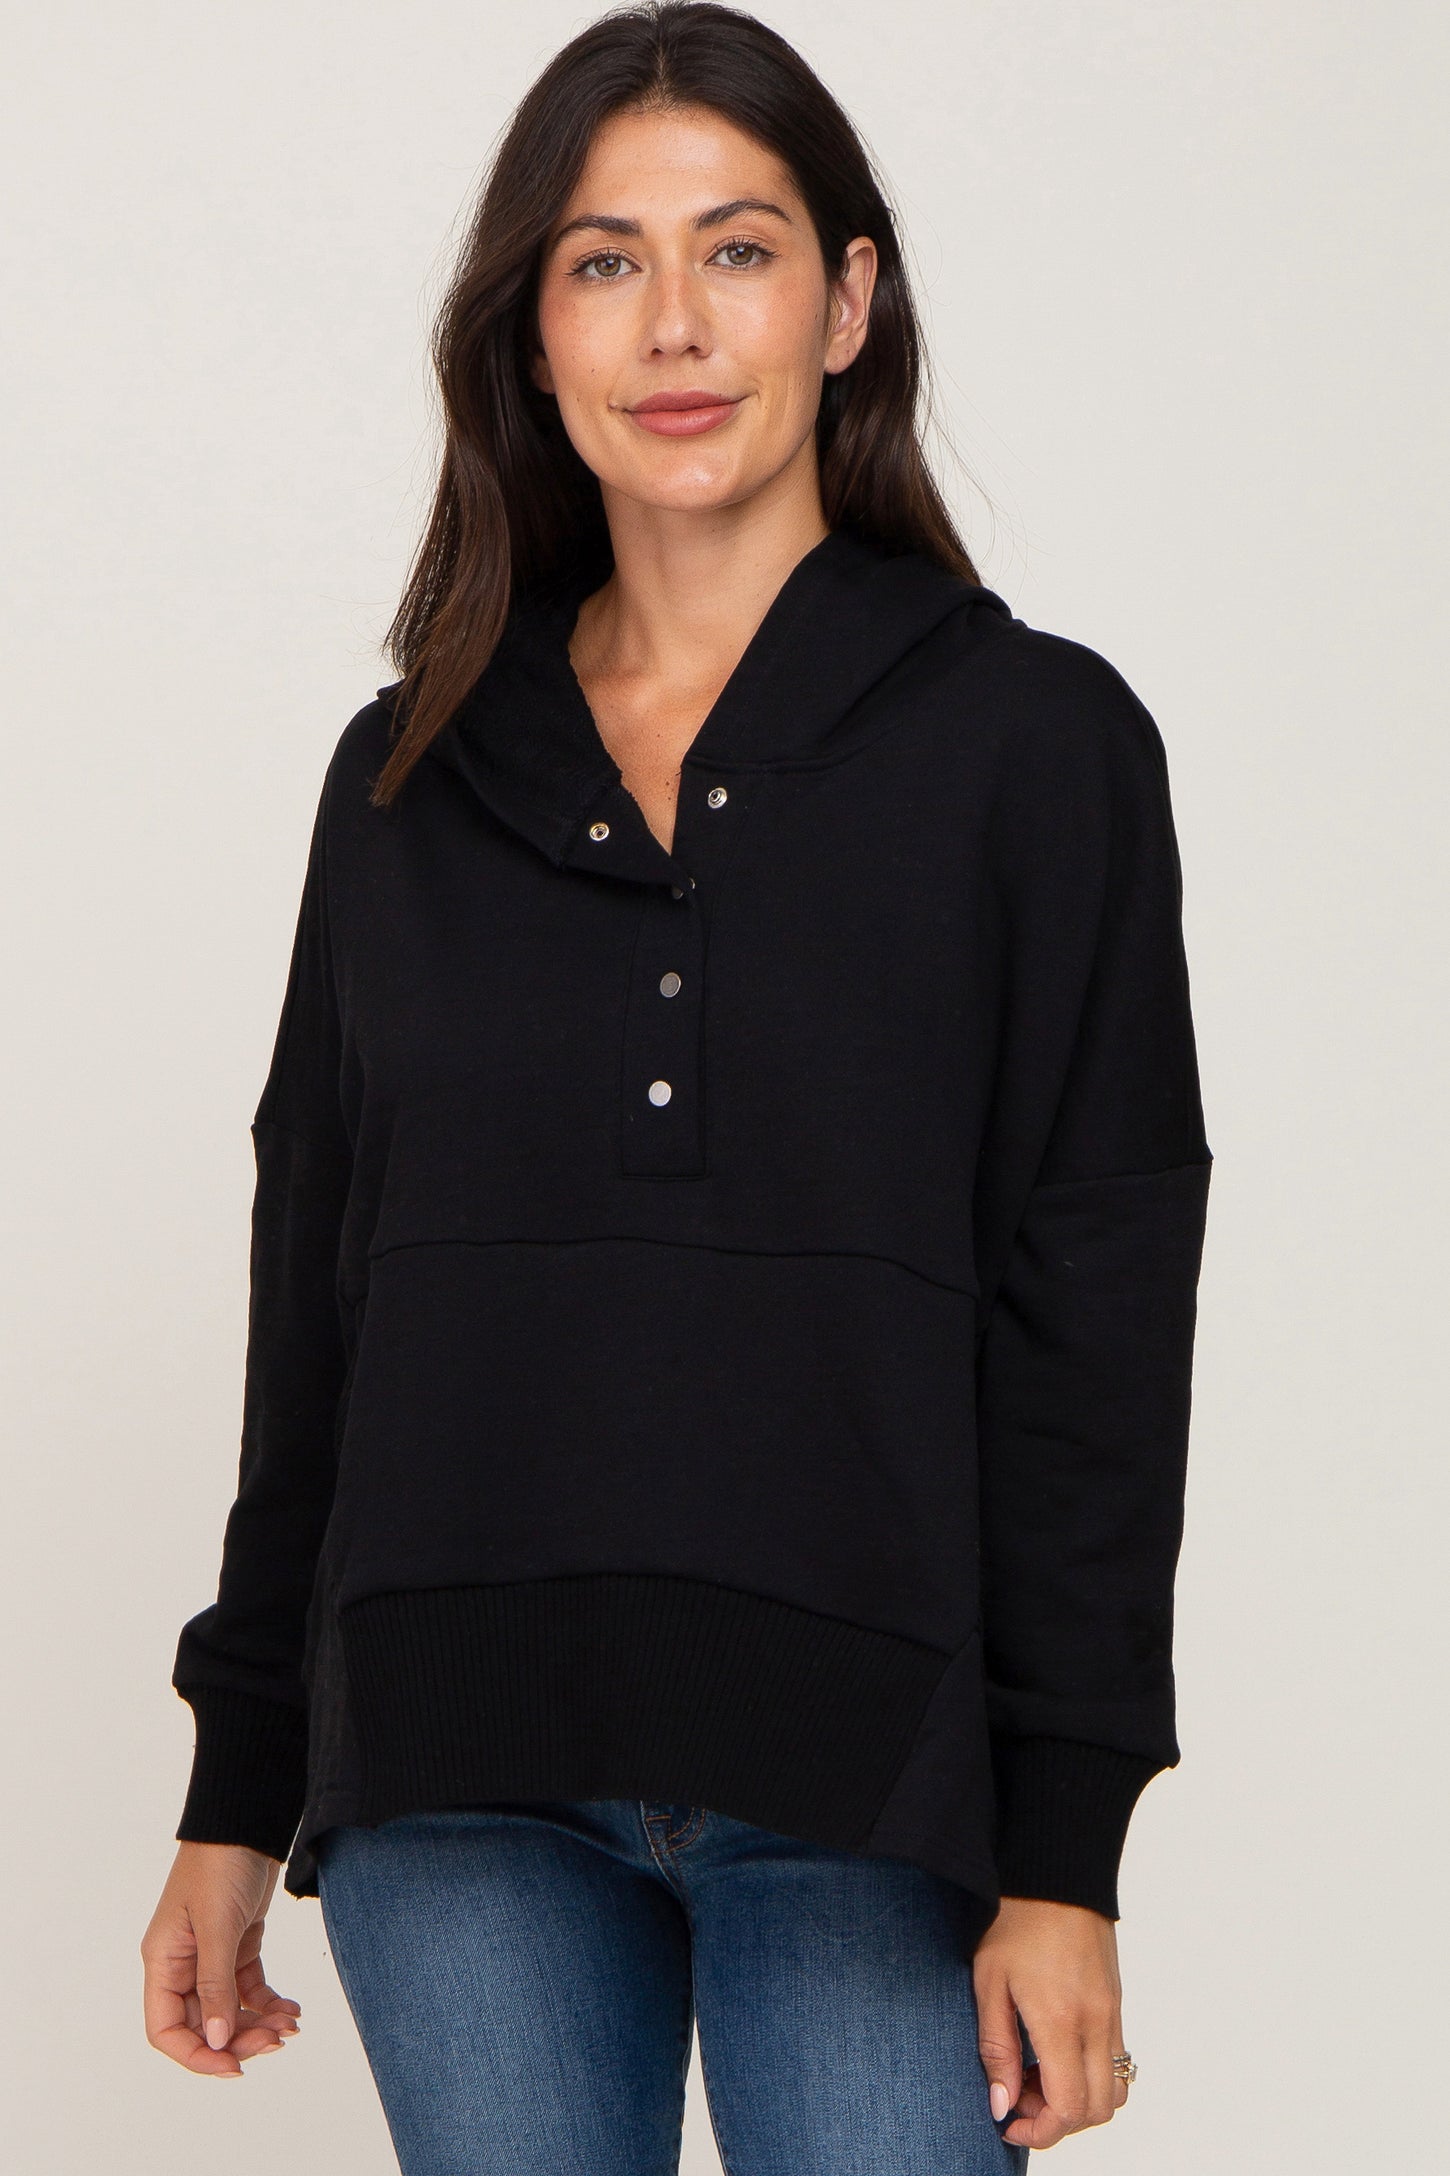 Black Button Front Ribbed Trim Hooded Sweatshirt